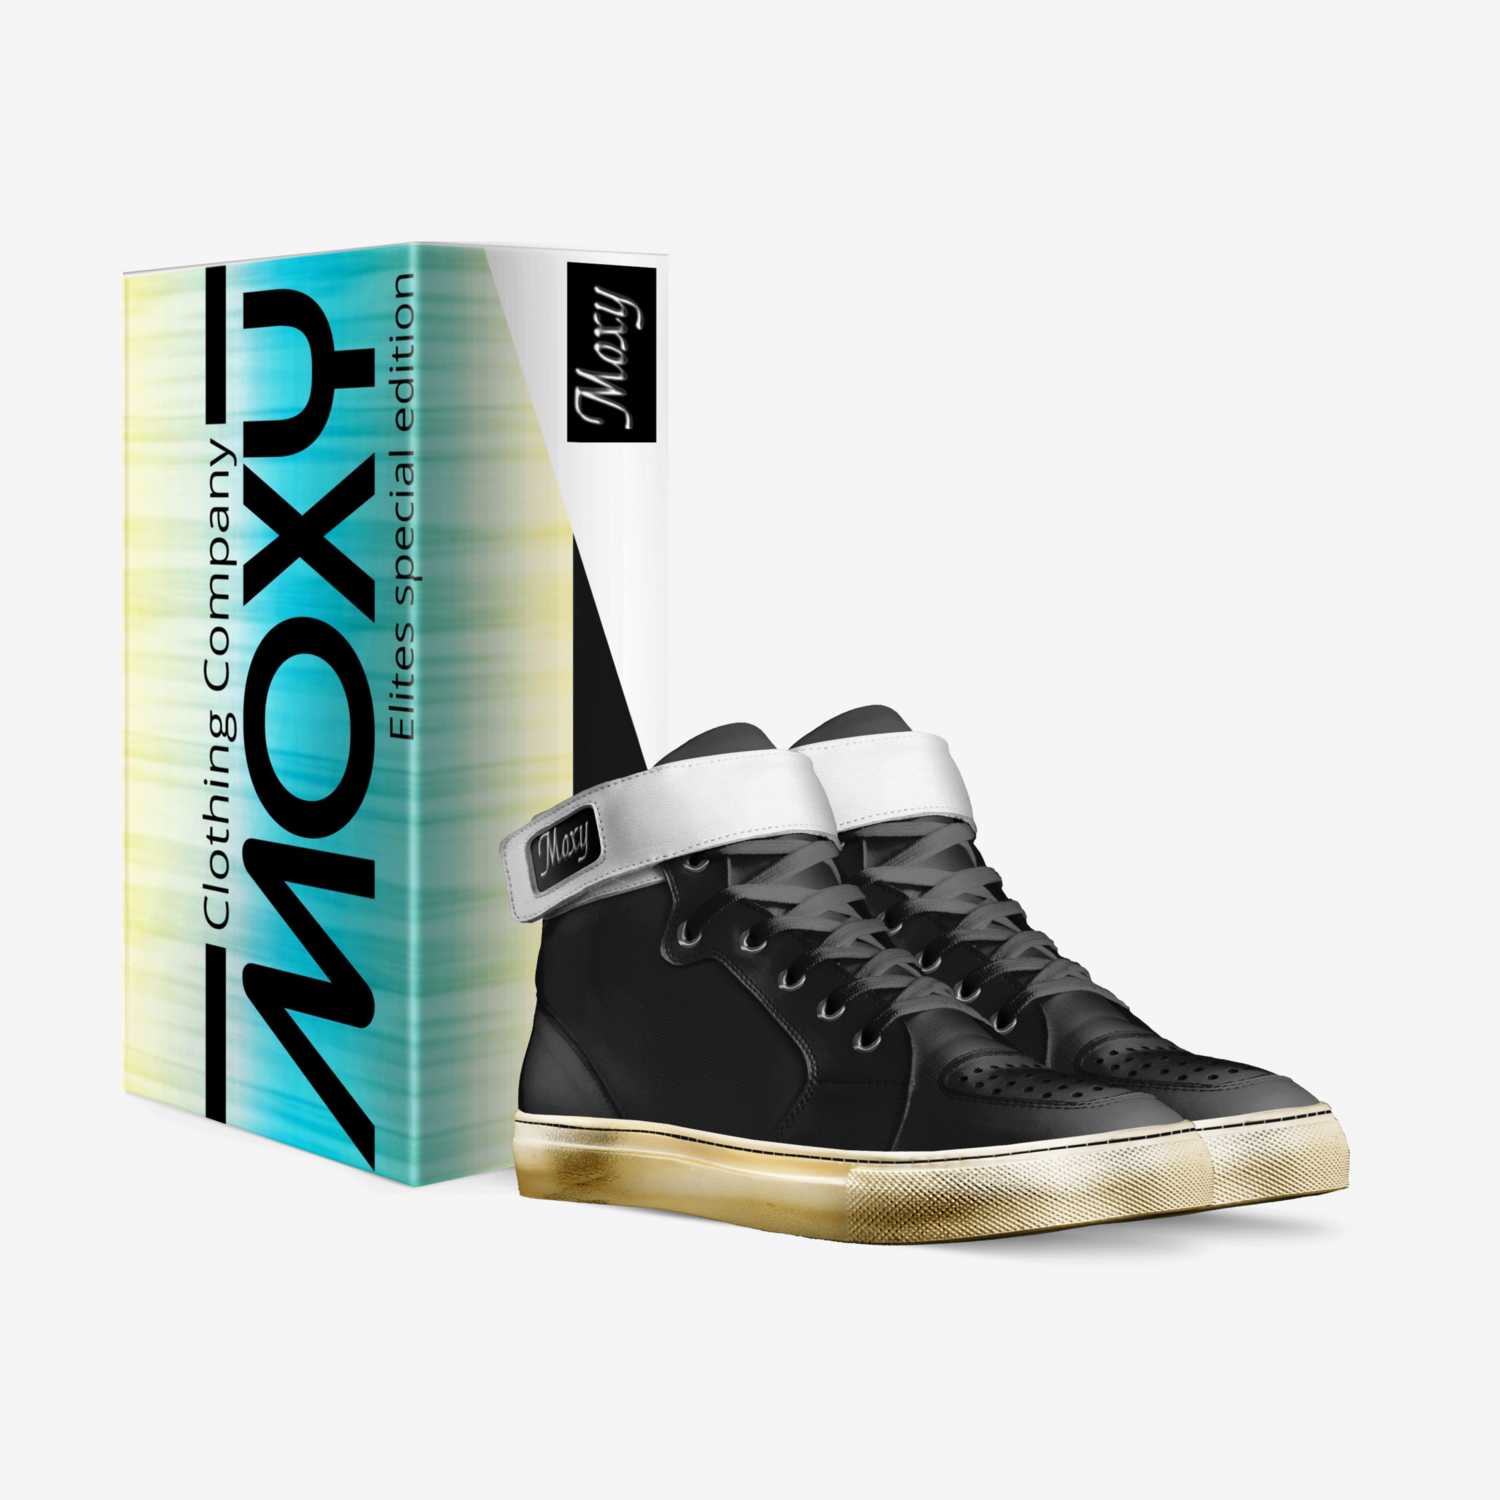 Moxy elites custom made in Italy shoes by Moxy Clothing Co. | Box view